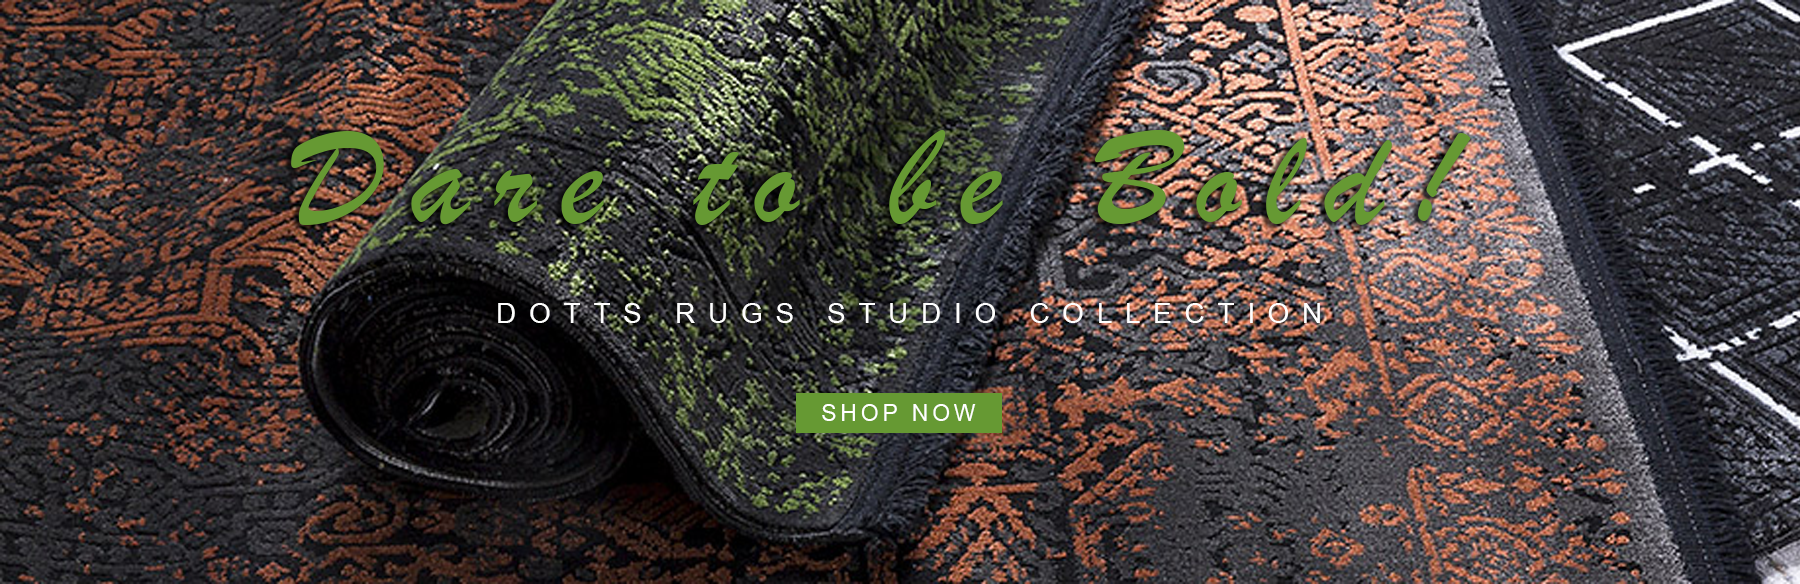 Dare to be Bold! DOTTS RUGS Studio Collection. Shop Now.